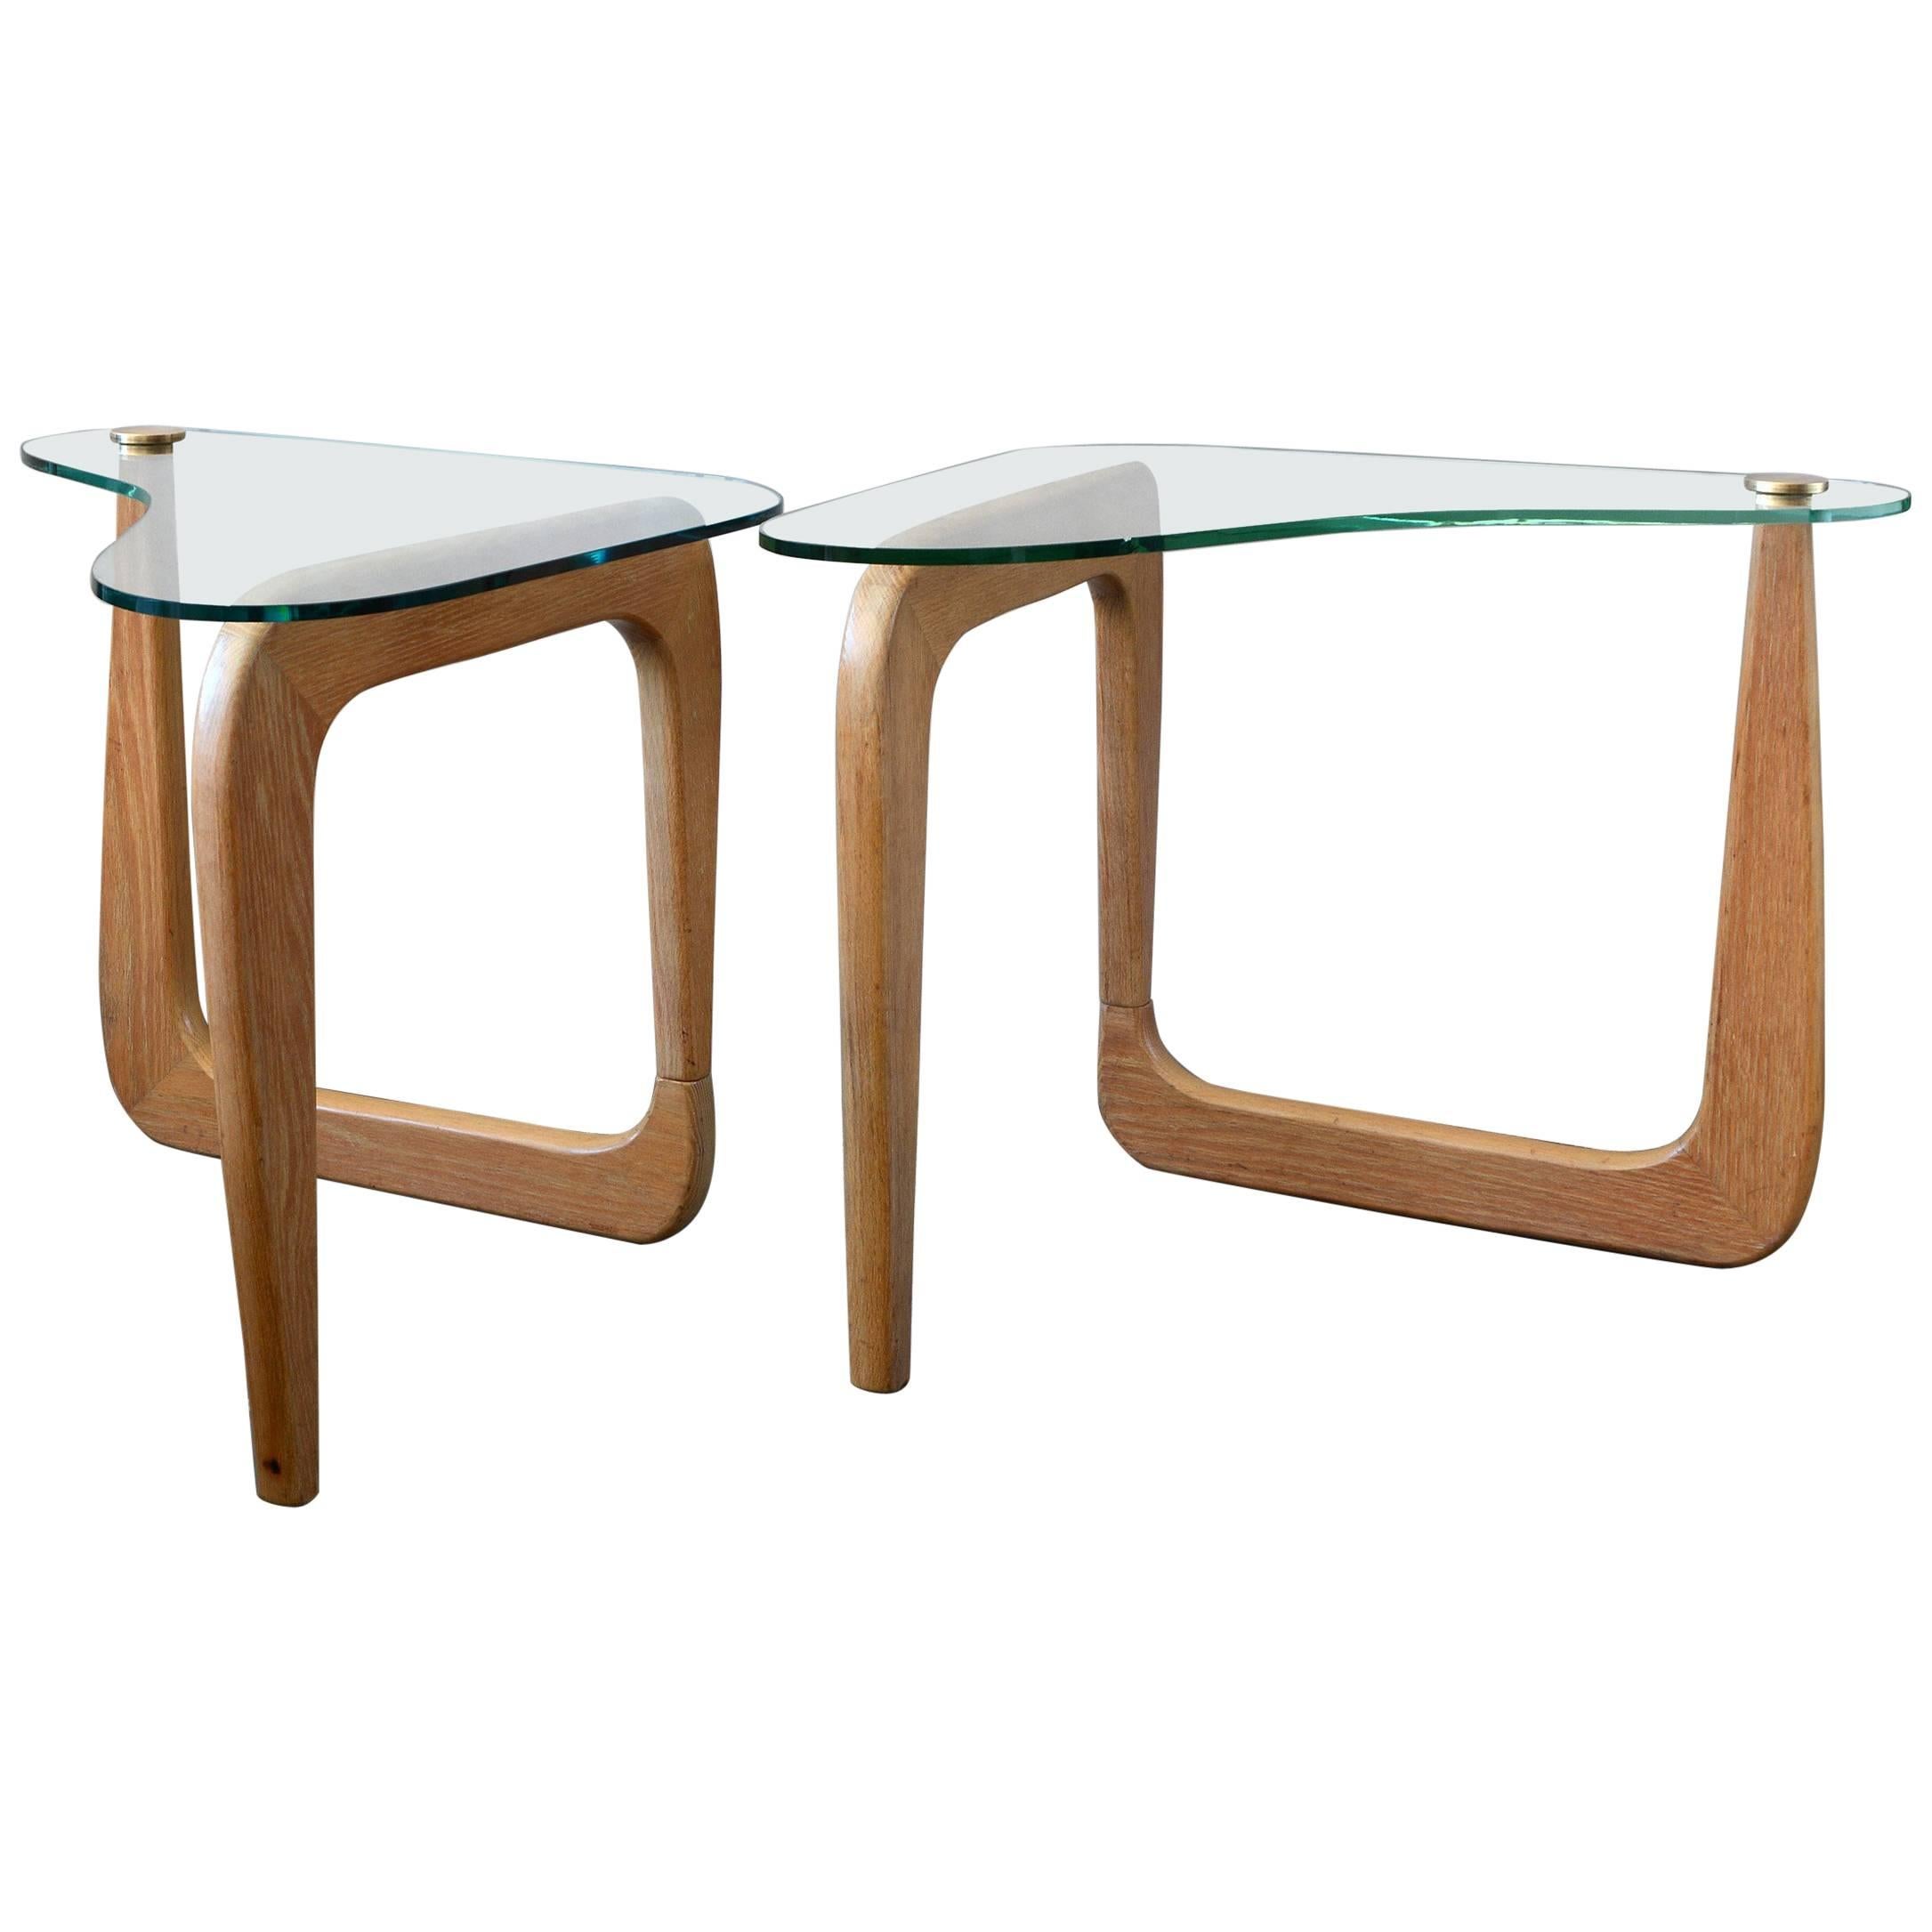 Pair of Sculptural Cerused Oak and Glass End Tables